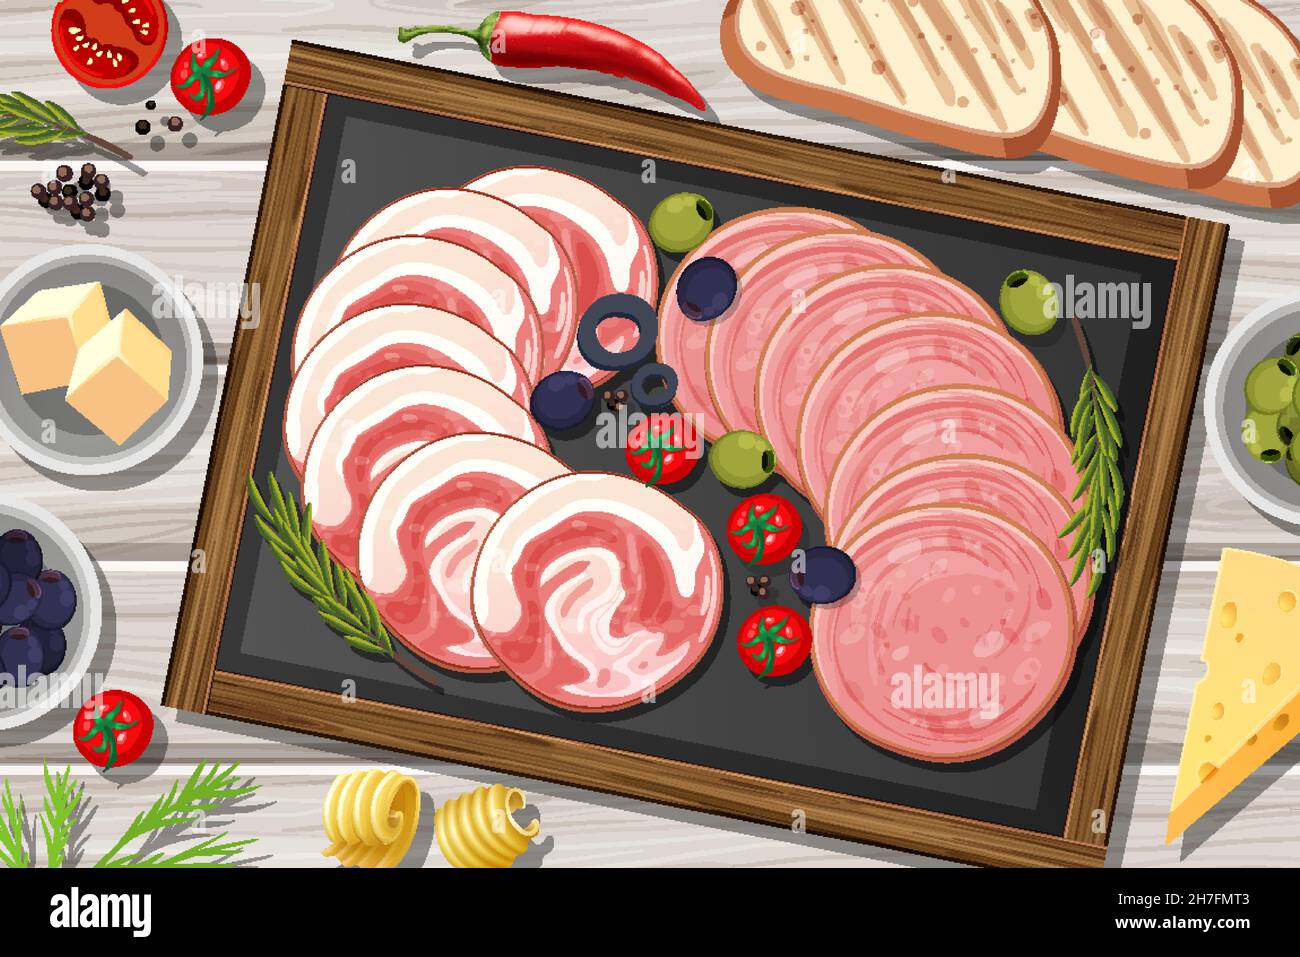 Platter of cold meats and smoked meats on the table background illustration Stock Vector